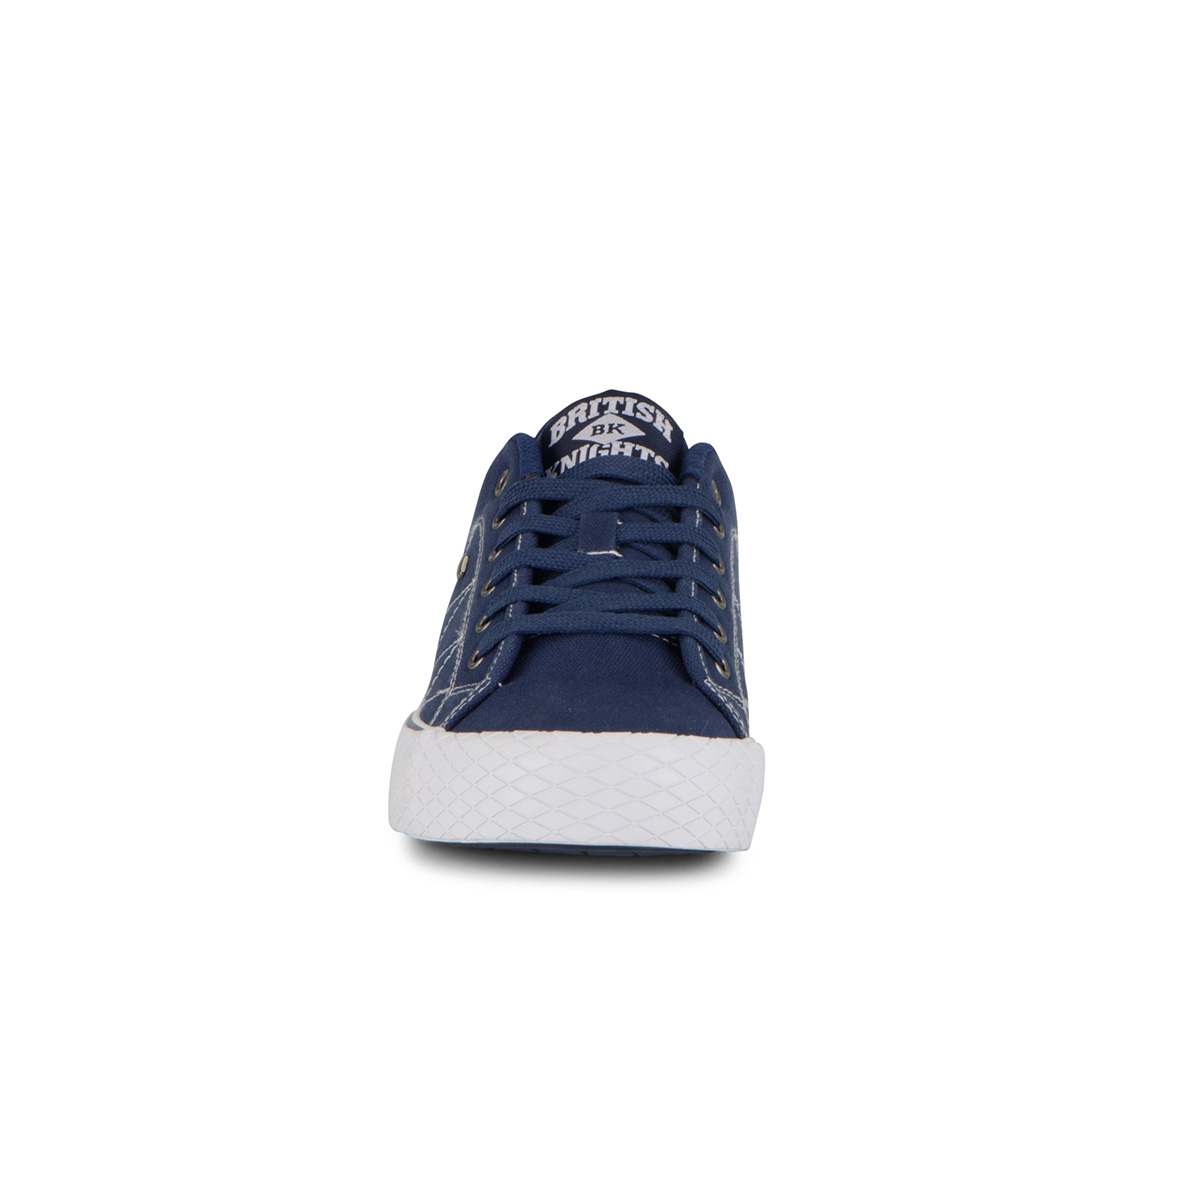 British Knights Men's Vulture 2 Canvas Sneaker Shoes - image 4 of 7